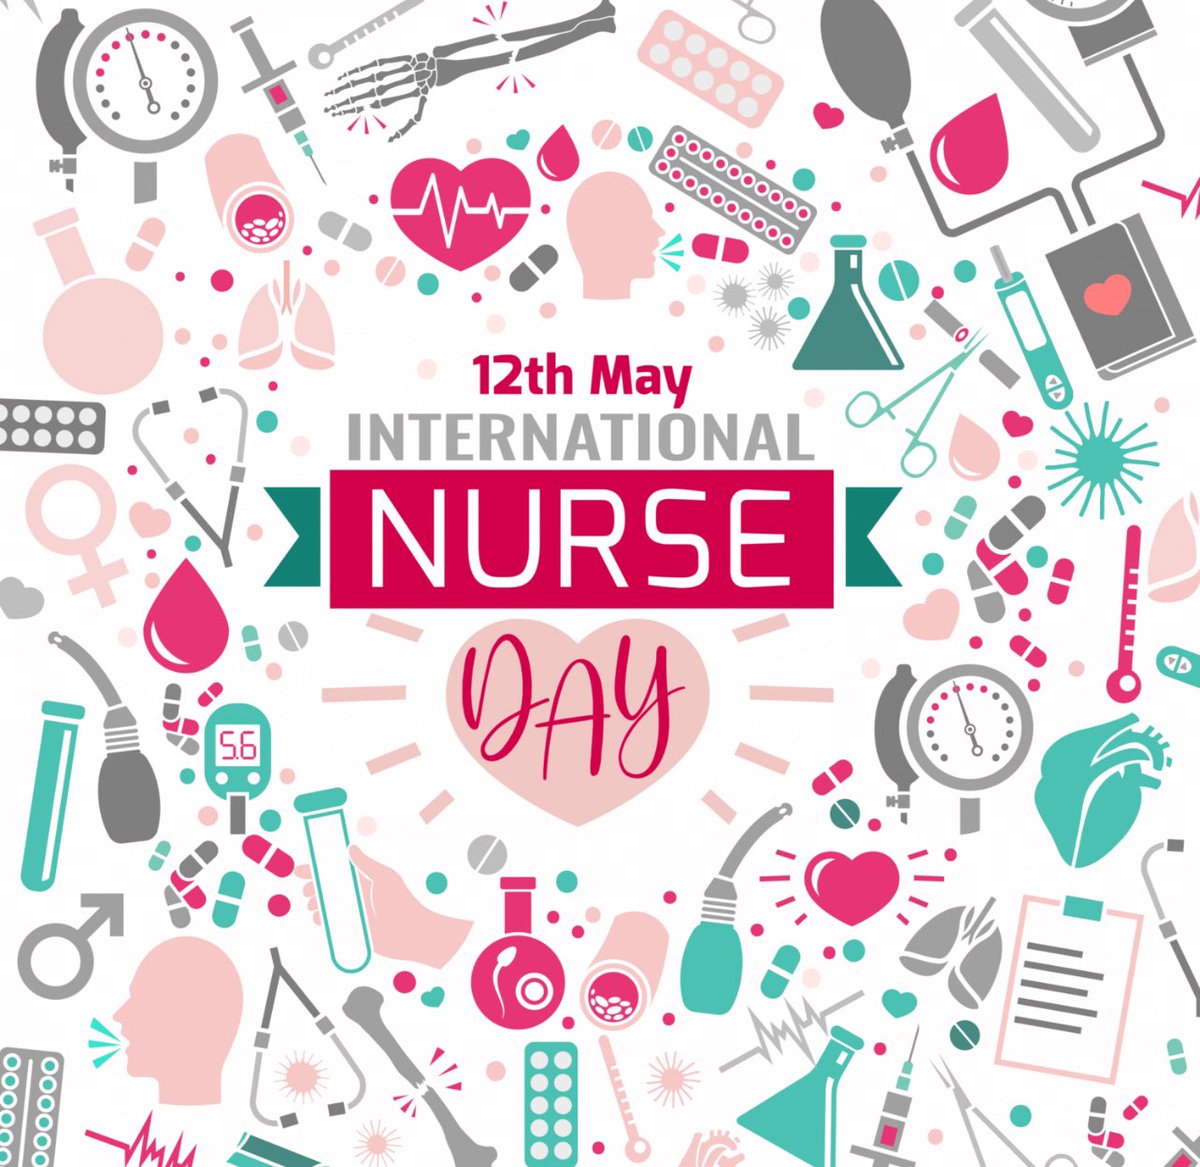 But a special shout out to our #socialcare nurses who give great clinical care, compassion and leadership in very different environments to colleagues in #NHS. Their roles are often misunderstood and under appreciated, so it’s been great to see @theRCN raising their profile ❤️